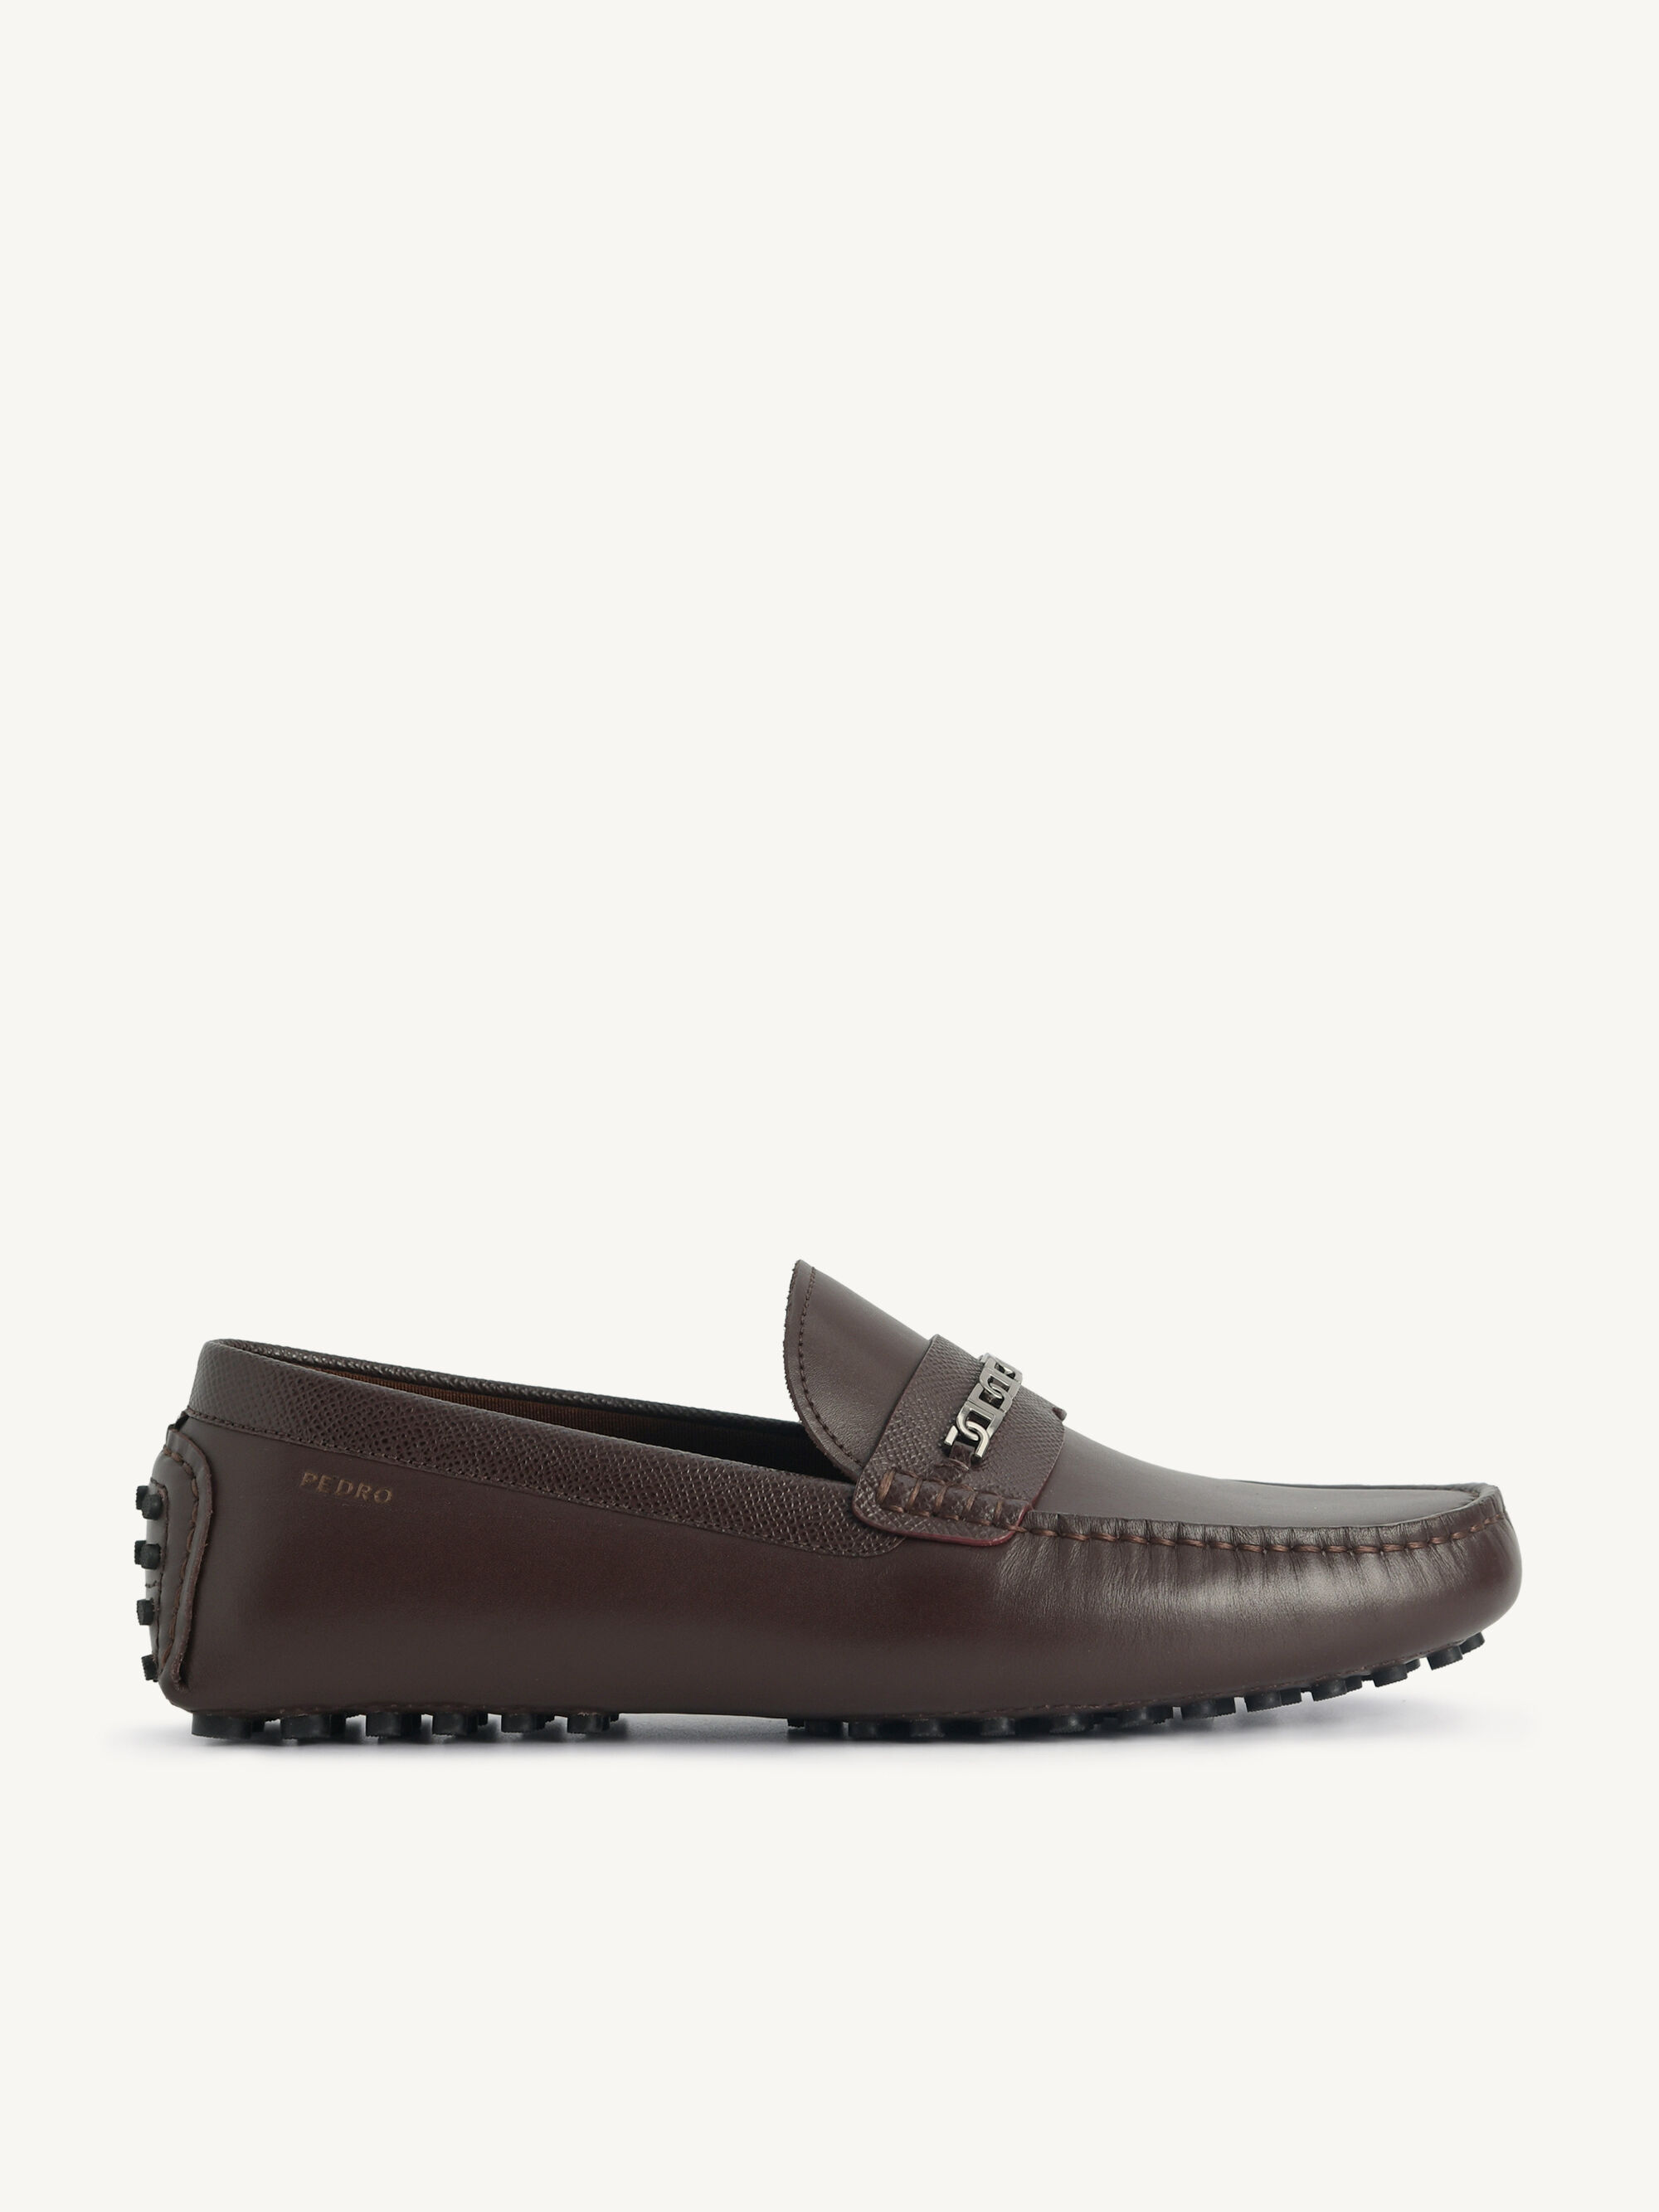 Icon leather Moccasins - Dark Brown